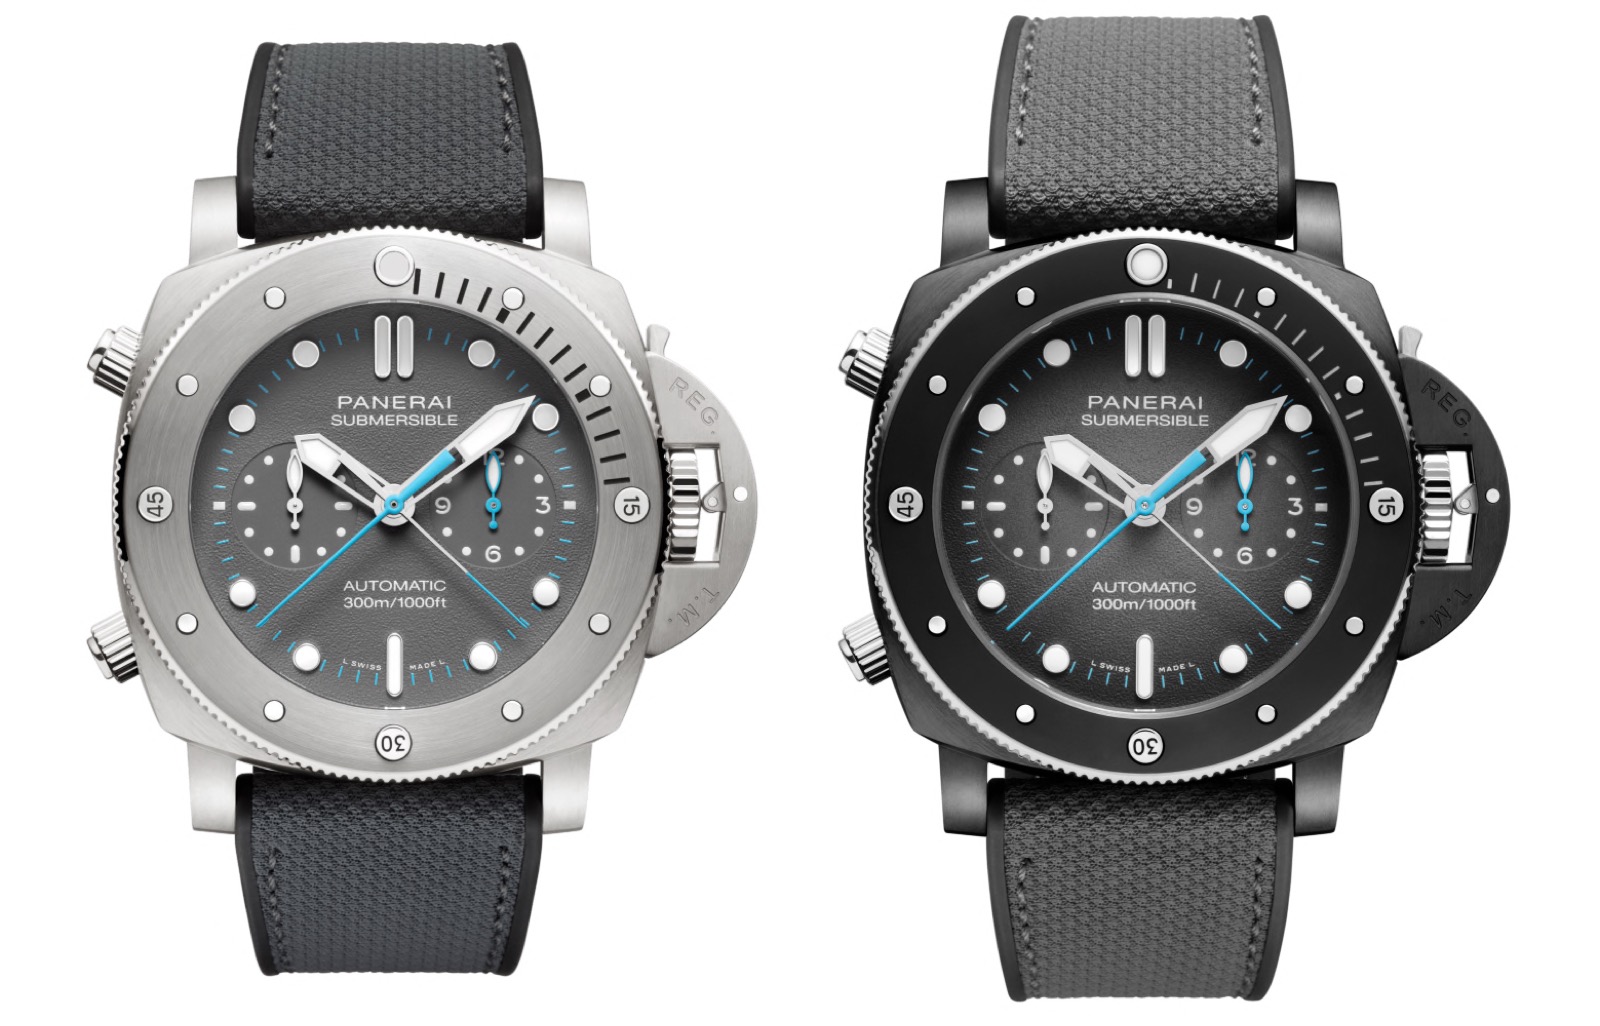 Panerai Submersible Chrono Flyback Jimmy Chin Editions